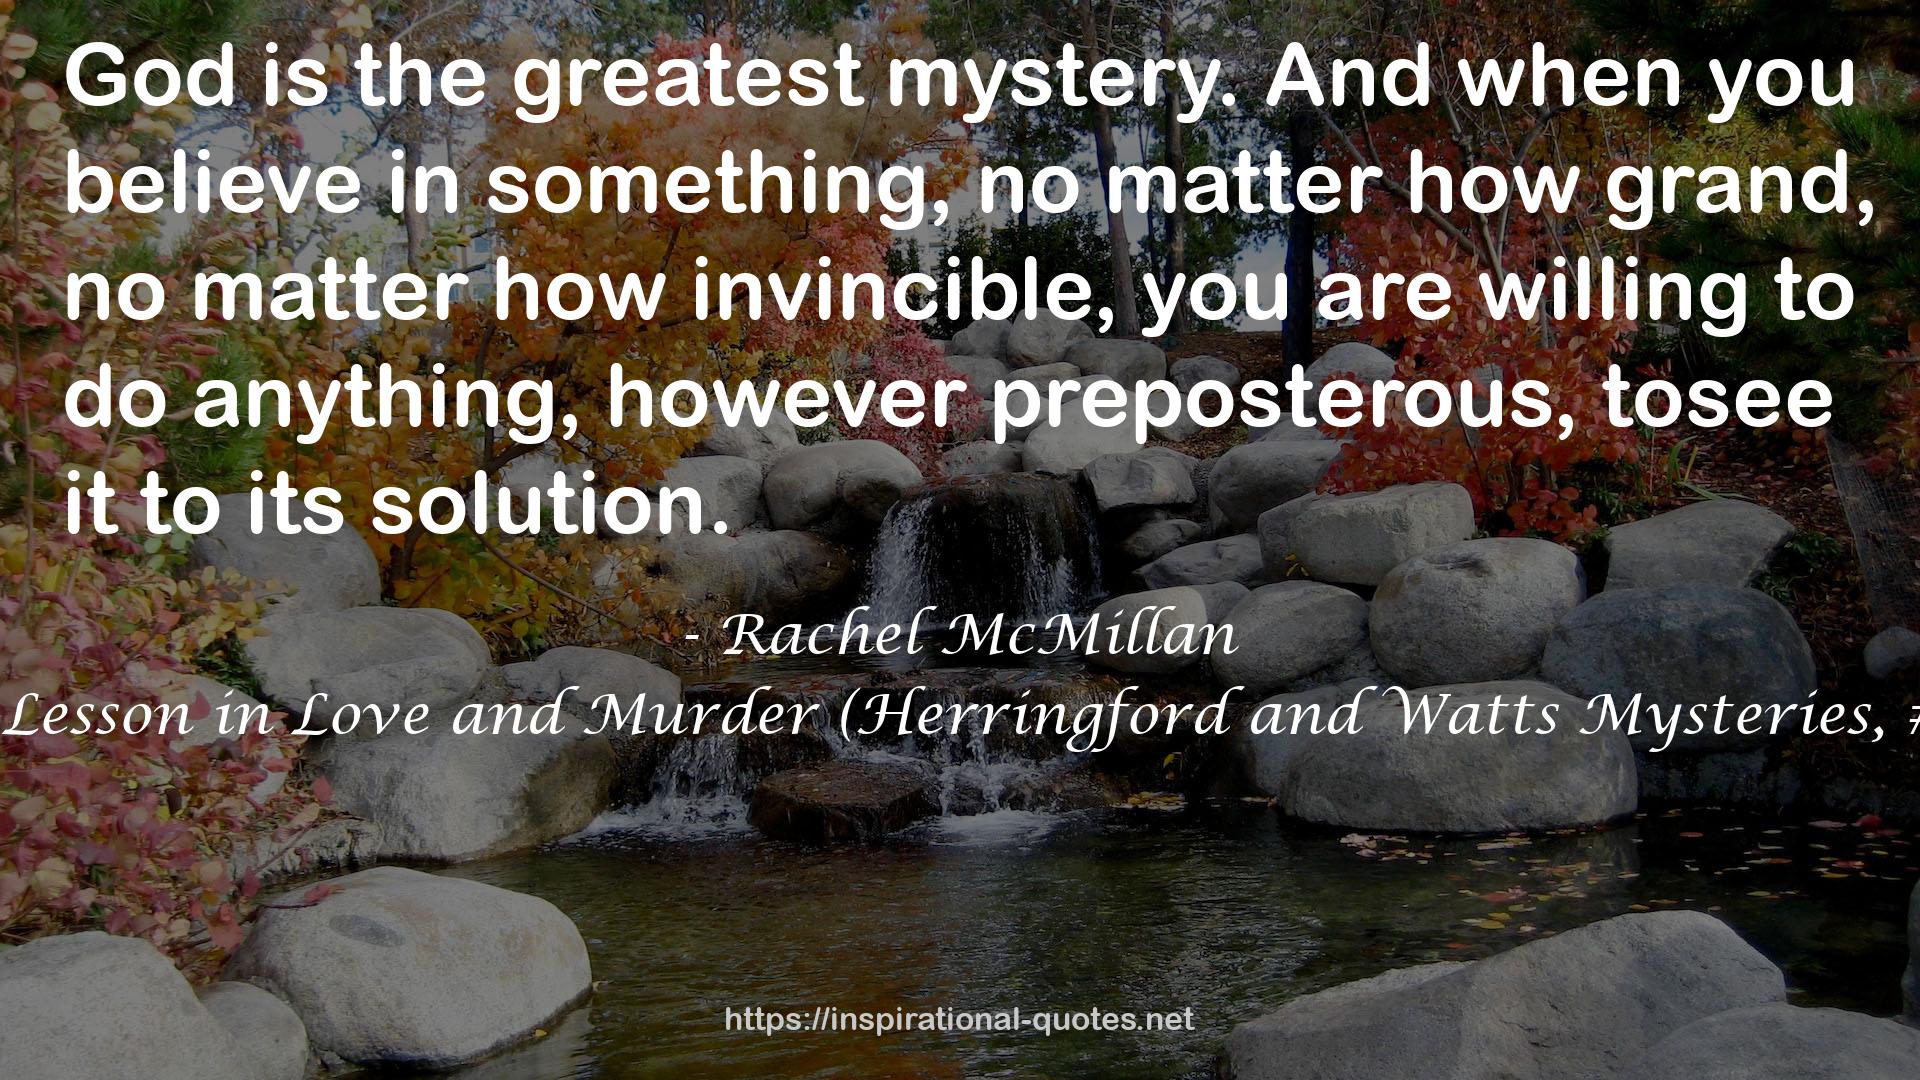 A Lesson in Love and Murder (Herringford and Watts Mysteries, #2) QUOTES